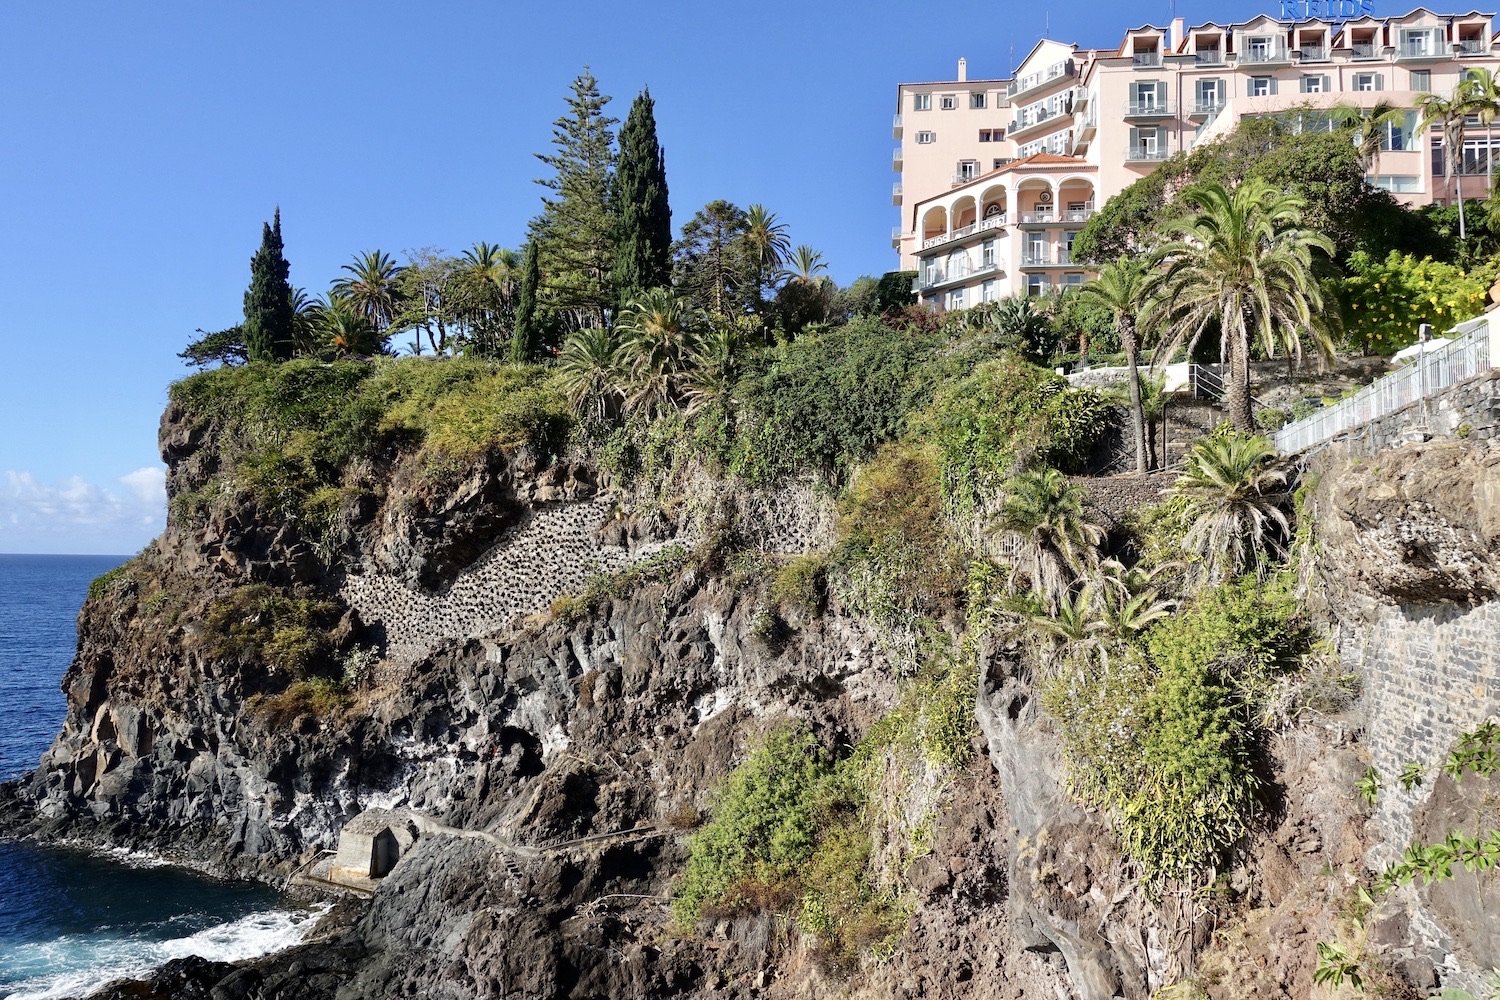 Hotel Reid's Palace, first luxury hotel built in Madeira